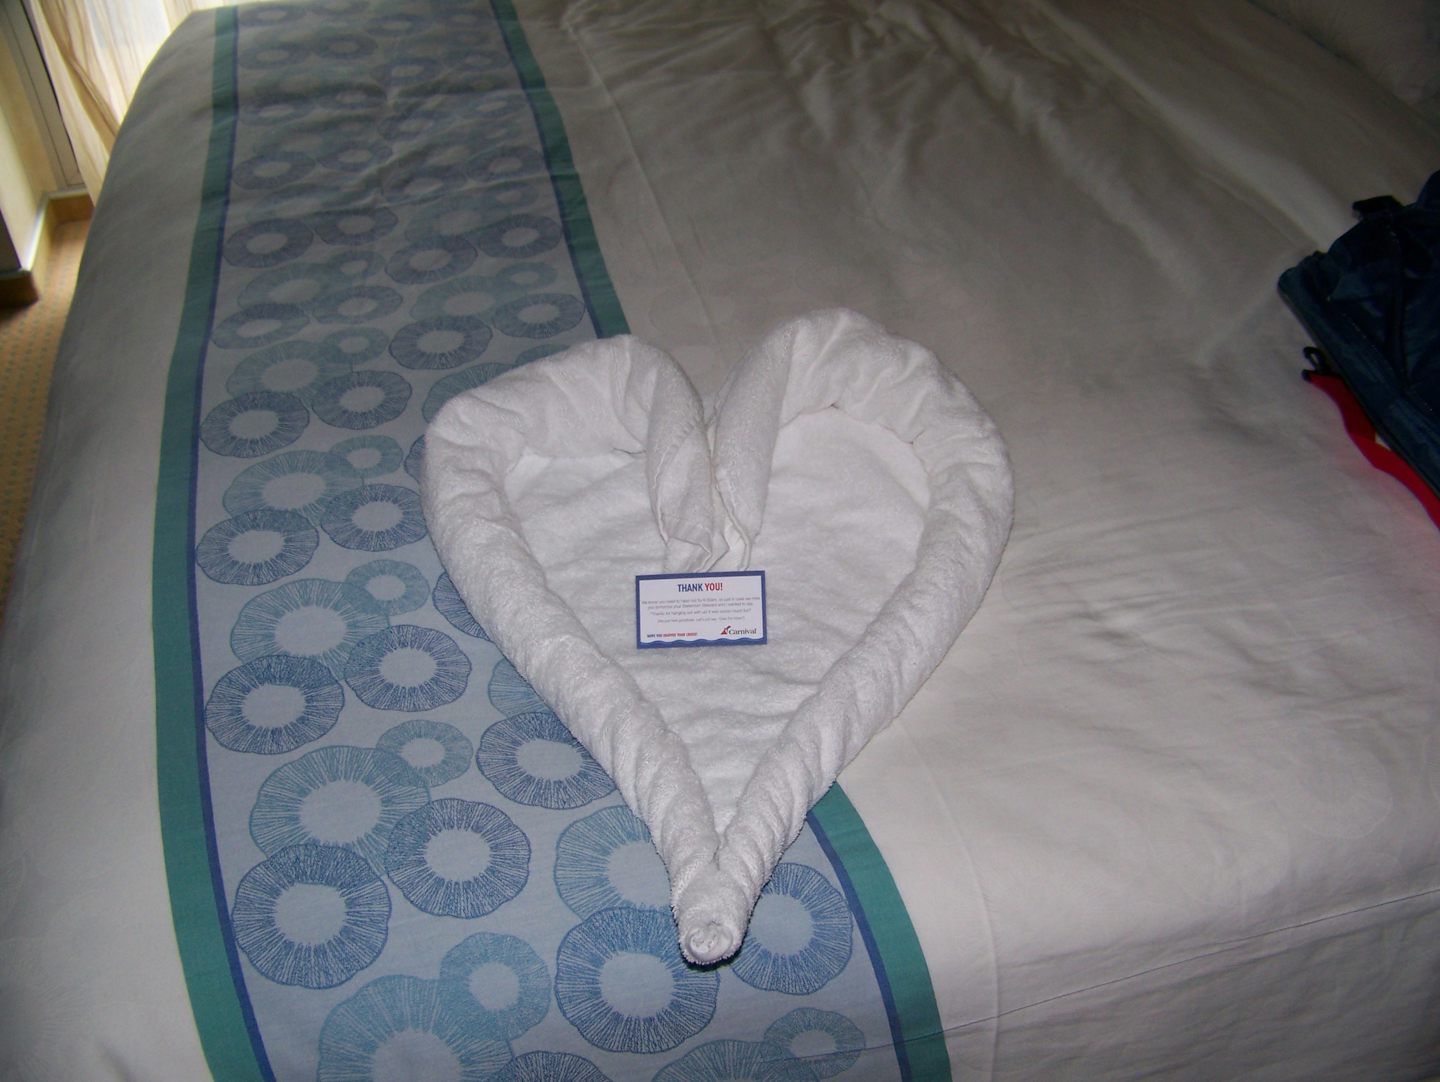 Some of the towel art done by room steward on ship. 